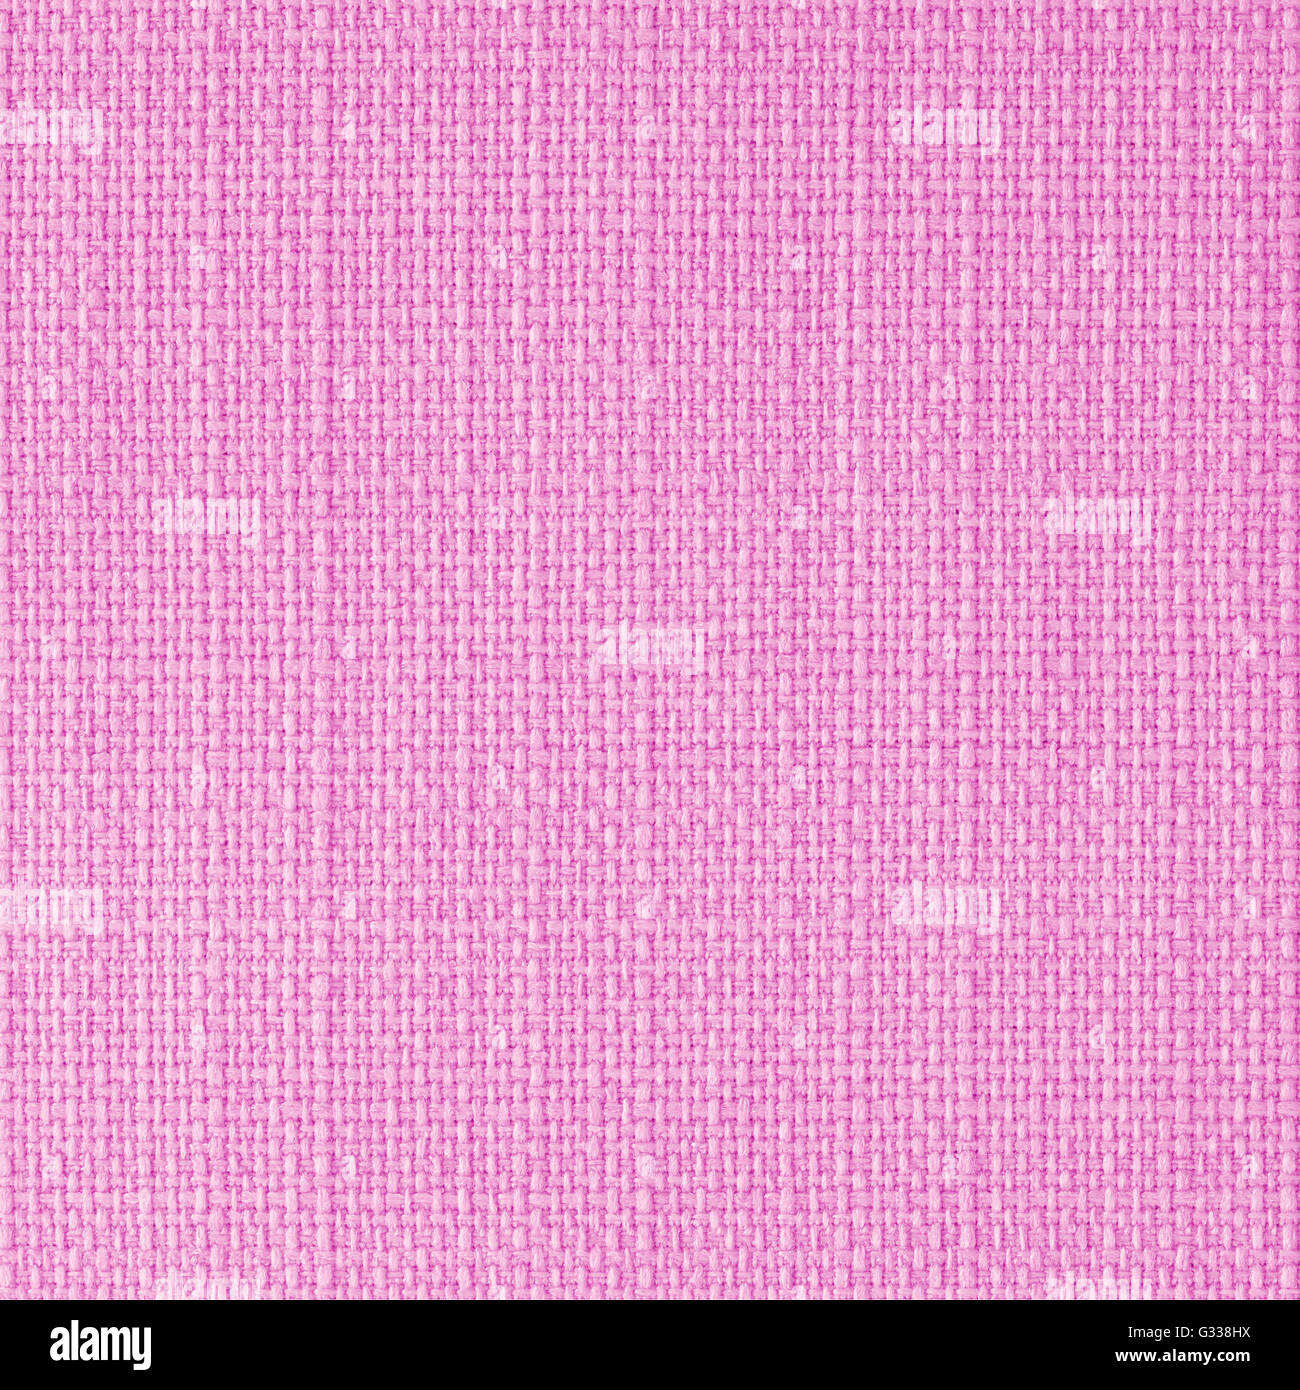 Candy pink fabric texture. Close up, top view. Stock Photo